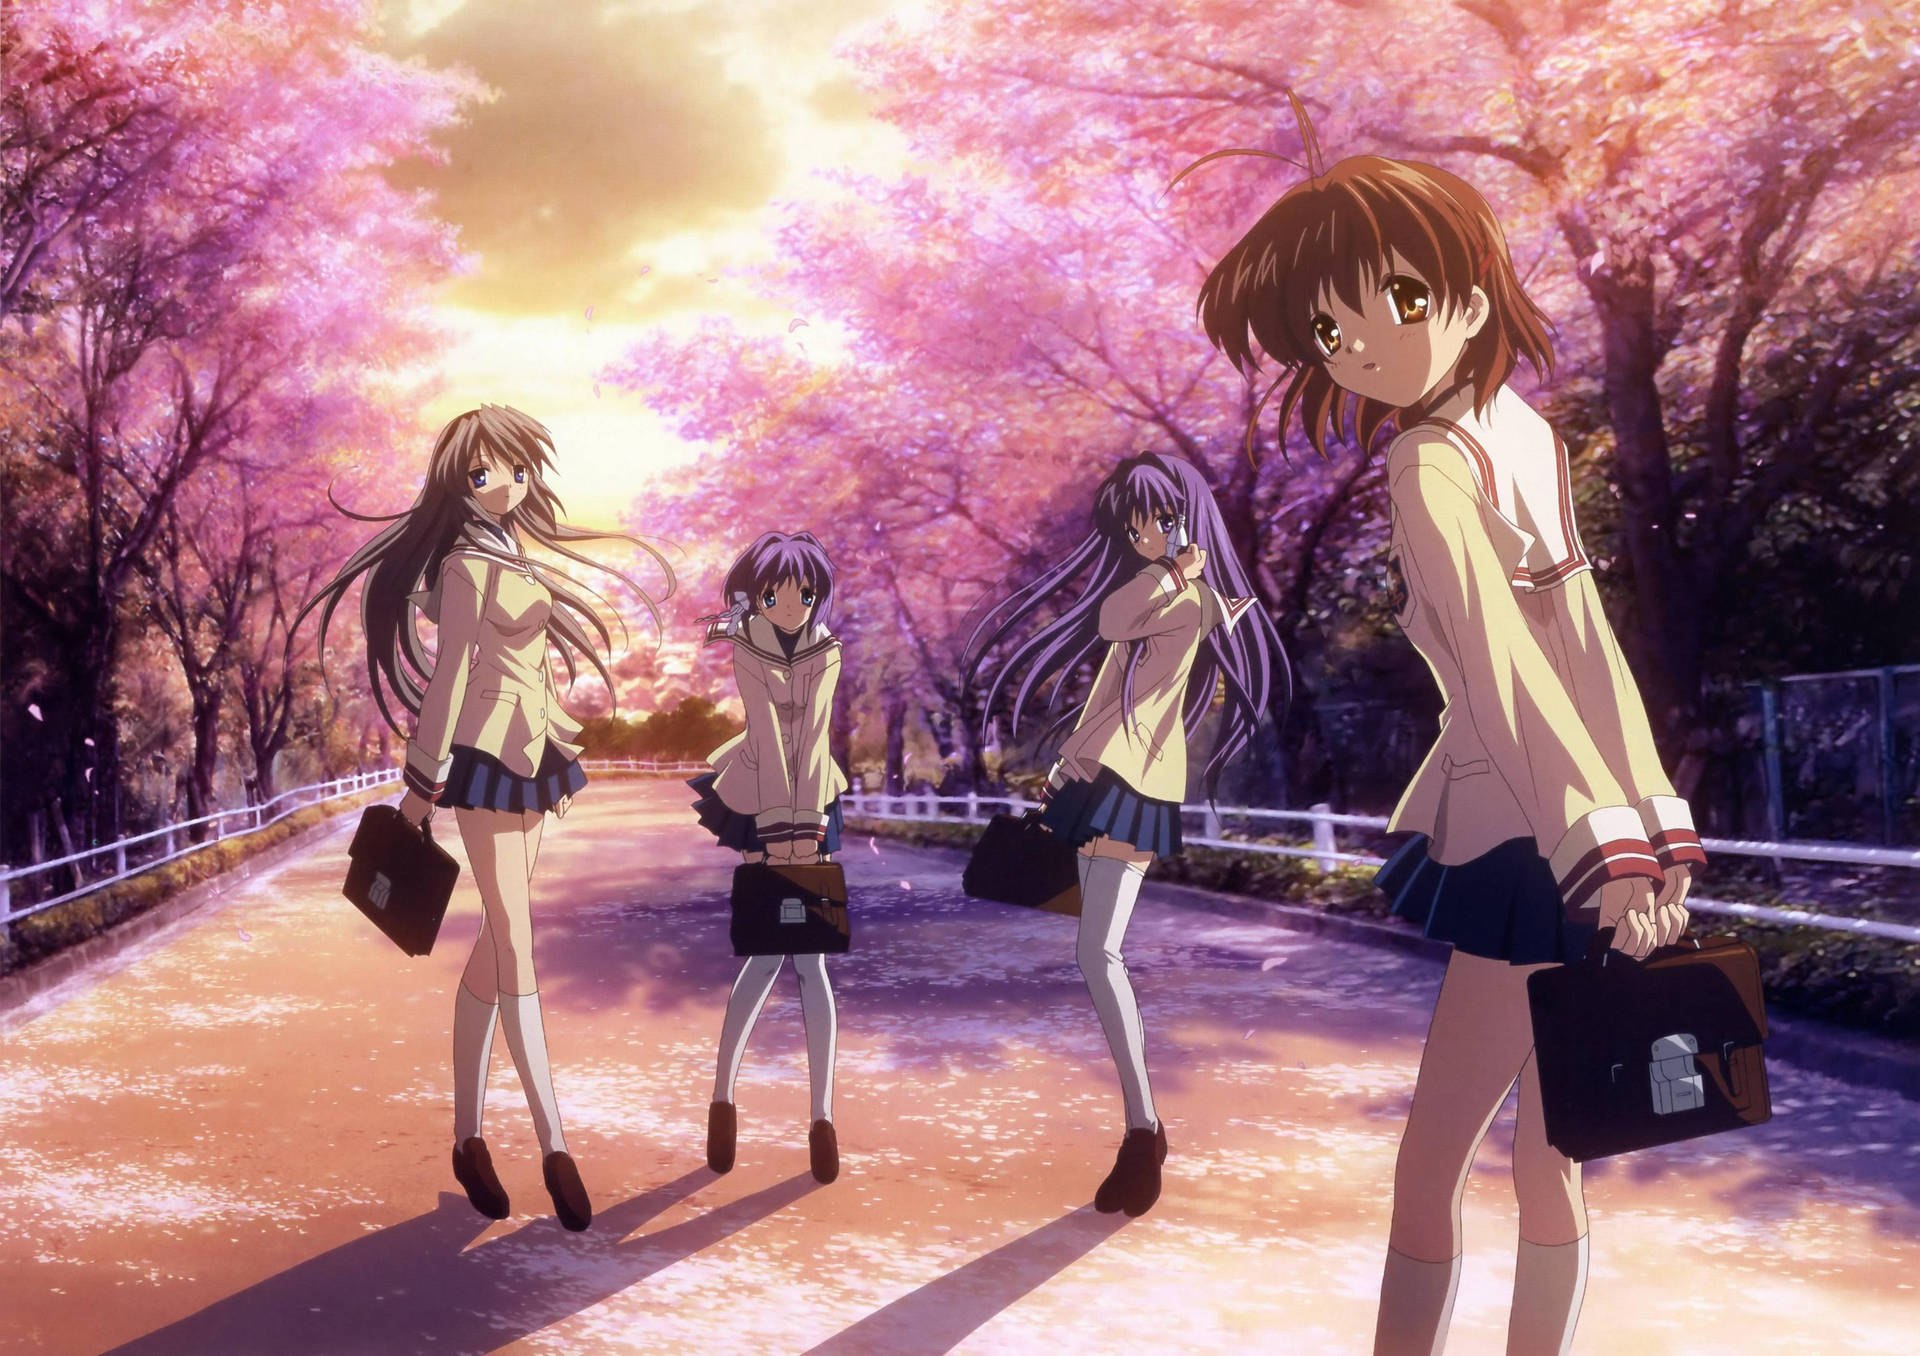 Top Anime Clannad Girls Background